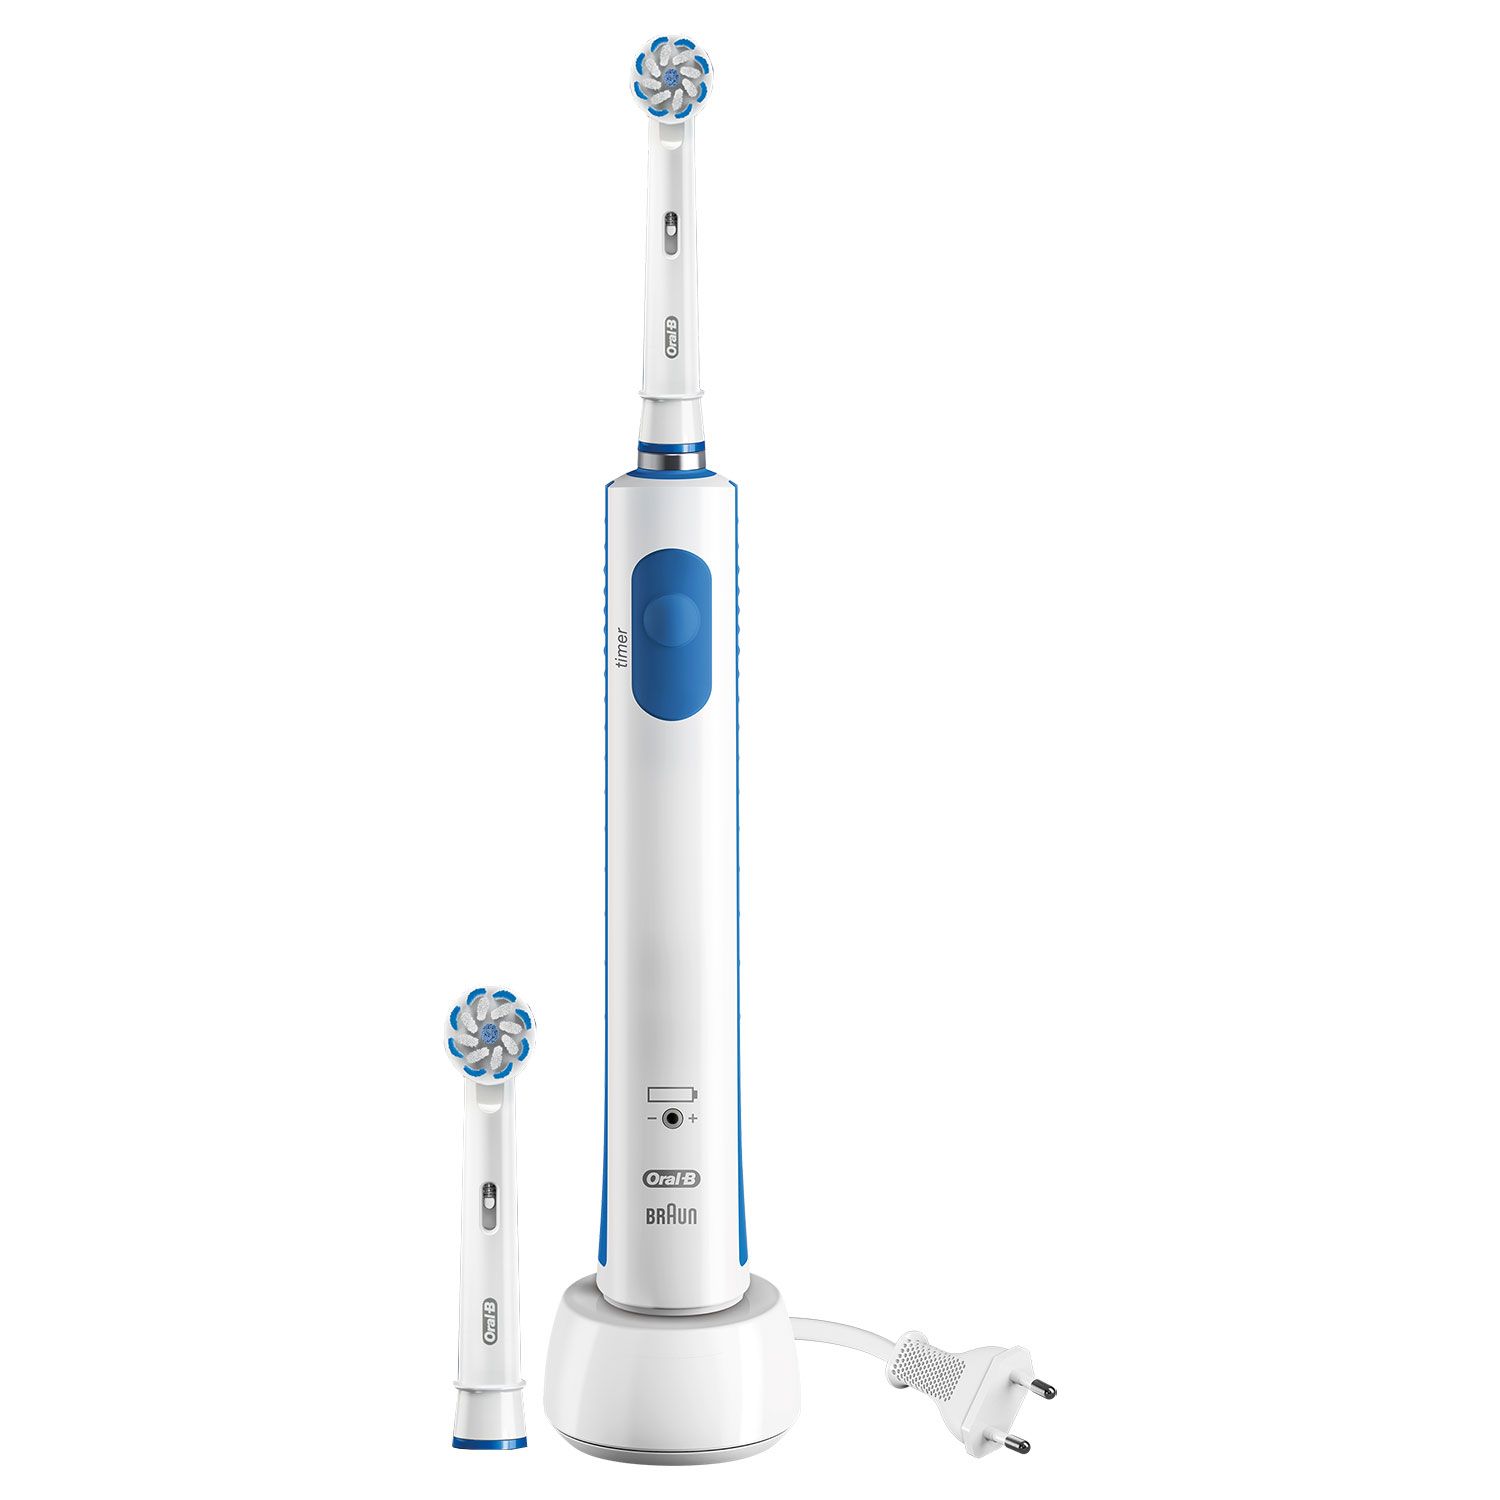 Oral B Pro 570 Sensi Ultra Thin Electric Toothbrush with Refill Head

Experience the Oral-B Sensi UltraThin toothbrush head designed by the #1 dentist recommended brand worldwide – Oral-B. The round petal shape is designed with dentists. It has soft, ultrathin bristles that are gentle on gums, combined with regular bristles that are tough on plaque. Sensi Ultrathin removes up to 100 percent more plaque and reduces gum inflammation by 100 percent compared to a manual toothbrush. The distinct combination of end rounded and ultrathin bristles make Sensi Ultrathin ideal for everyone with a sensitive mouth and everyone who is looking for just a great gentle clean.

    Removes up to 100 percent more: Plaque for healthier gums vs; a regular manual toothbrush.
    Reduces gum inflammation: By 100 percent vs a regular manual toothbrush.
    Oral-B the #1 brand: Used by Dentists & approved by the Oral Health Foundation

Experience the Oral-B Sensi Ultra-Thin

The gentlest tooth and gum care
Inspired by professional dental tools, the Sensi UltraThin toothbrush head is designed in a round petal shape with soft UltraThin bristles to give you the gentlest Oral-B brushing experience while reducing inflammation, reversing gingivitis, and improving gum health.
	
Round head cleans better
Oral-B’s round head contours to surround each tooth for cleaner teeth and healthier gums*.

Designed with dentists
Round head with a combination of ultrathin and regular bristles that are gentle on gums, but tough on plaque.

New brush head after three months
Dentists recommend replacing your toothbrush every three months, or sooner if bristles are faded and worn. Oral-B replacement toothbrush heads feature indicator bristles that fade halfway to help remind you when to replace your toothbrush head to maintain a superior clean.

Brush heads designed with dentists
Oral-B brush refills are designed to perfectly fit your toothbrush and come with specialised features for great results. These features include end rounding to be gentle on gums, angled bristles to clean in-between teeth, and UltraThin bristles for extra gentle cleaning.
	
Number one dentist recommended
Oral-B is not only designed with dentists; it’s also the number one toothbrush brand recommended by dentists worldwide. Discover for yourself the next level of oral care by Oral-B.


Direction : Dentists recommend replacing your toothbrush head about every 3-4 months, or when bristles are faded and worn. Oral-B offers a variety of toothbrush heads to fit your personal oral health needs.